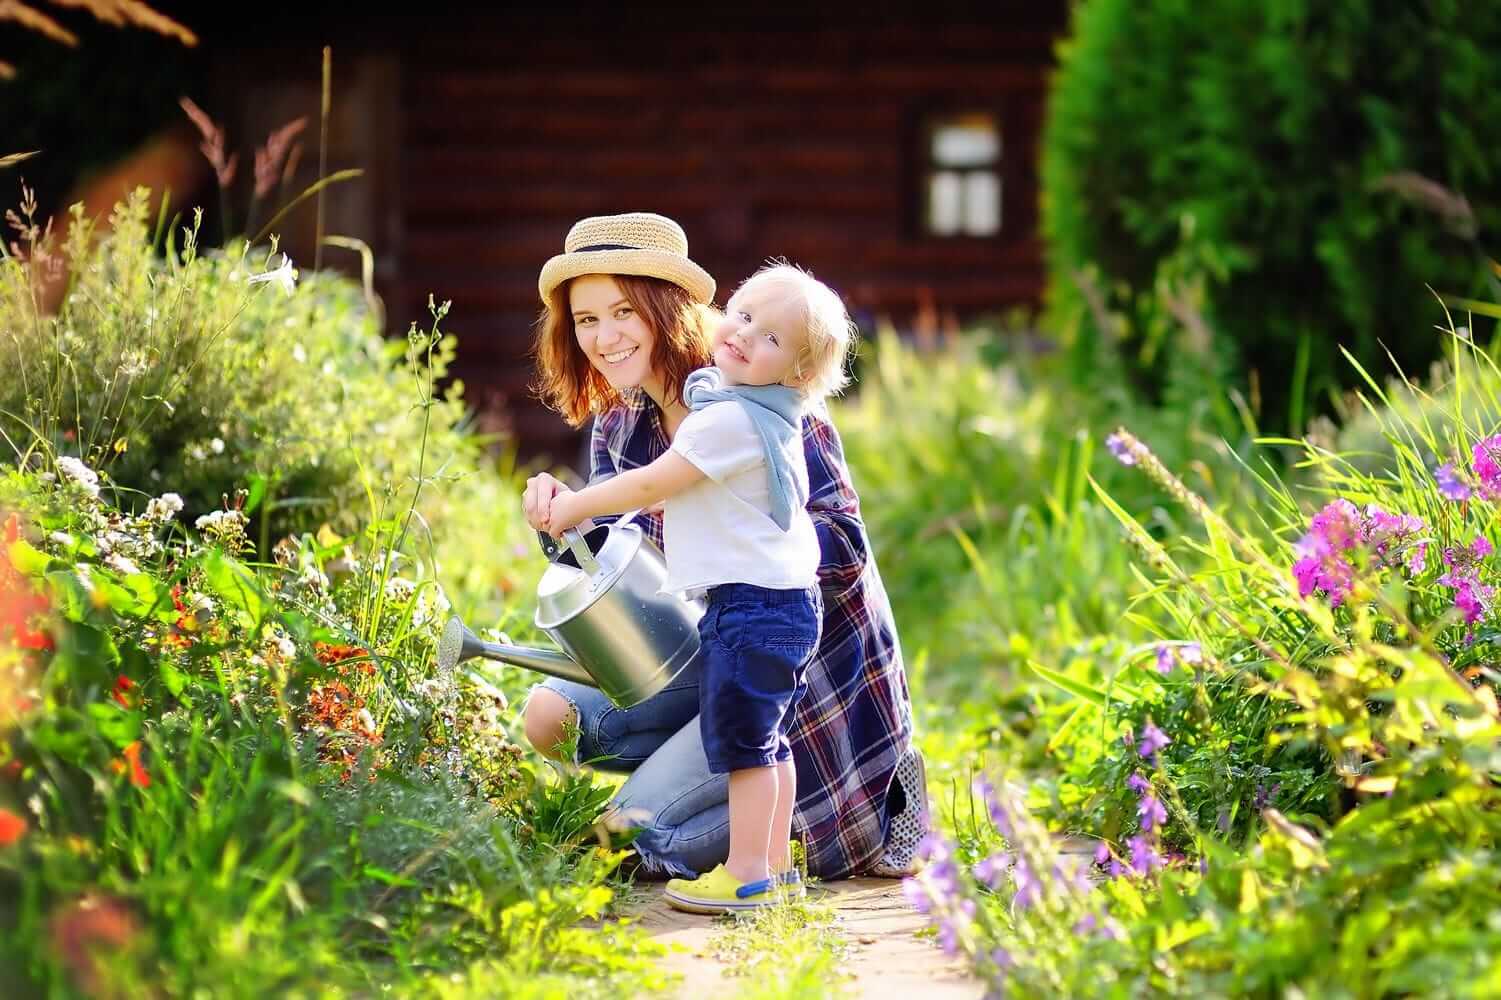 Gardening Fun with Your Little One